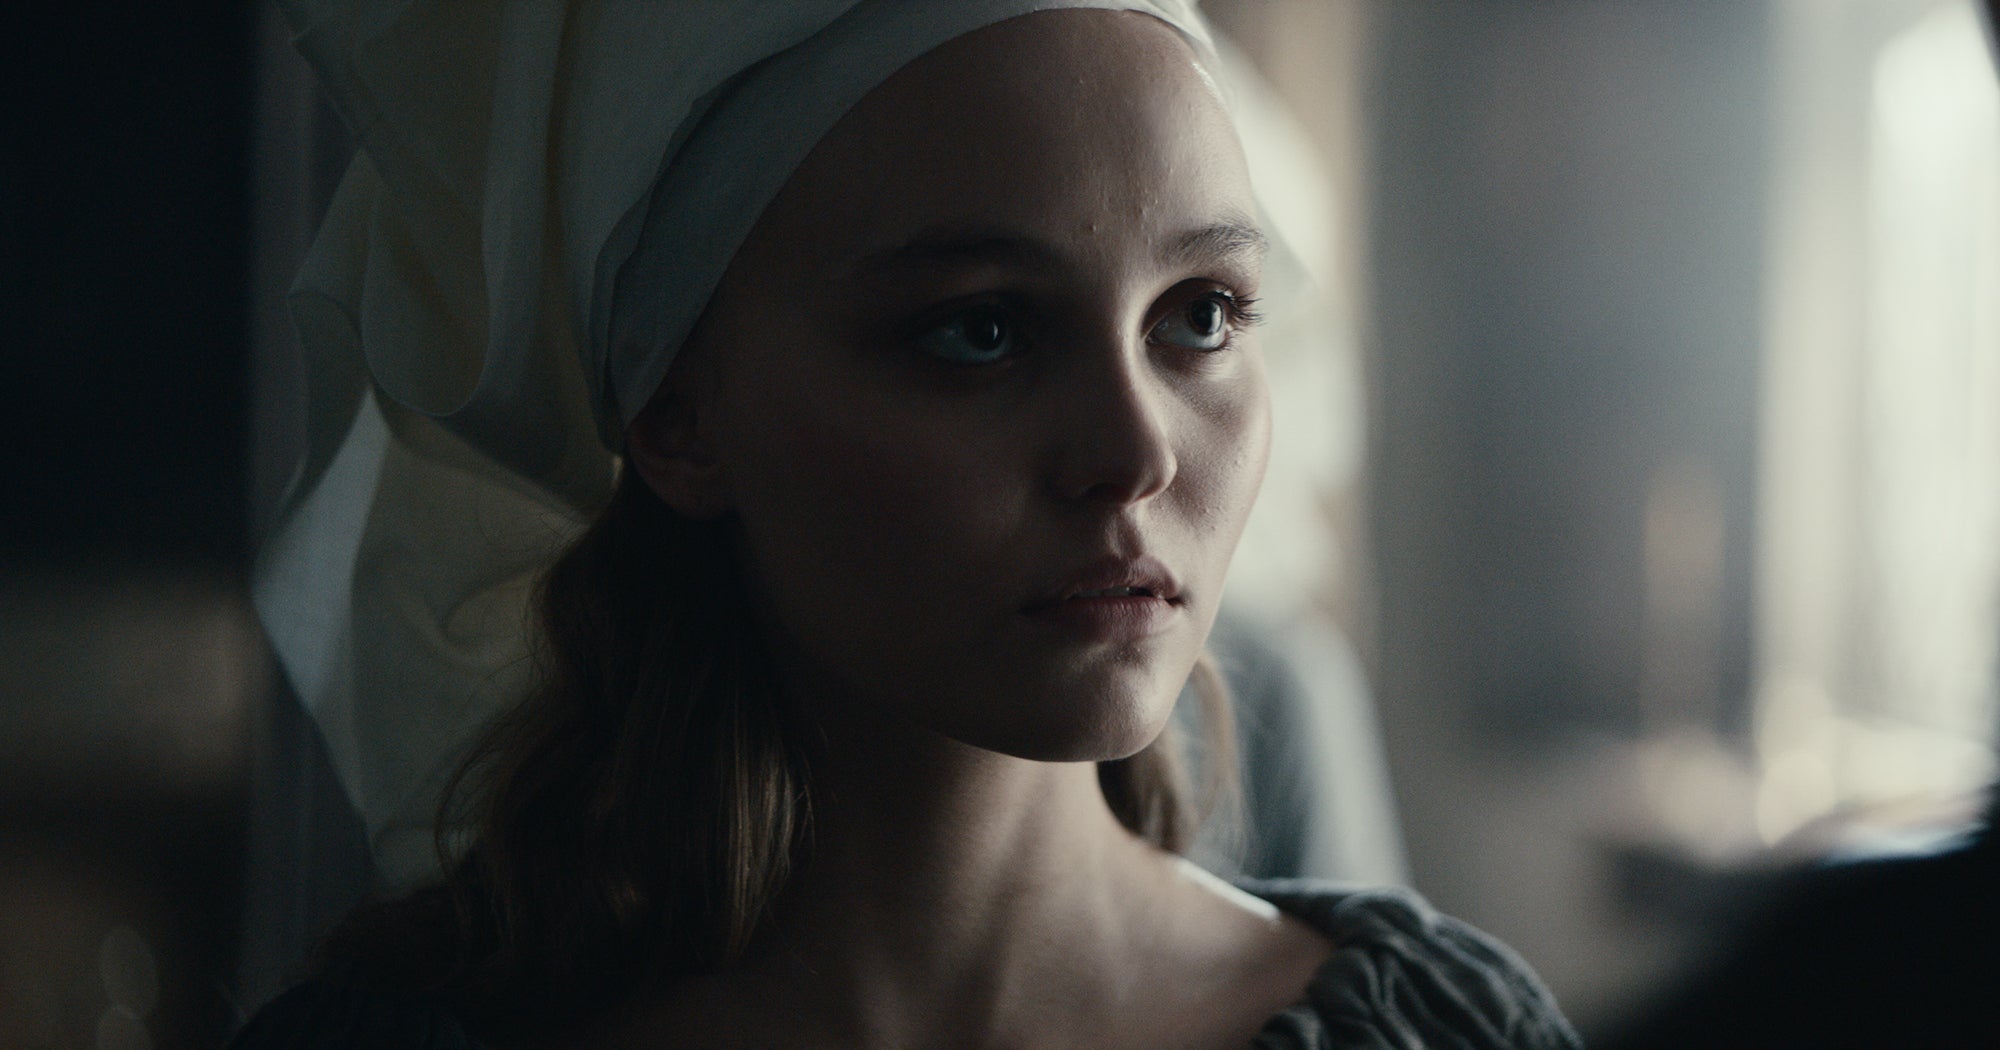 When Lily Rose Depp Scenes Start In The King, She Rules